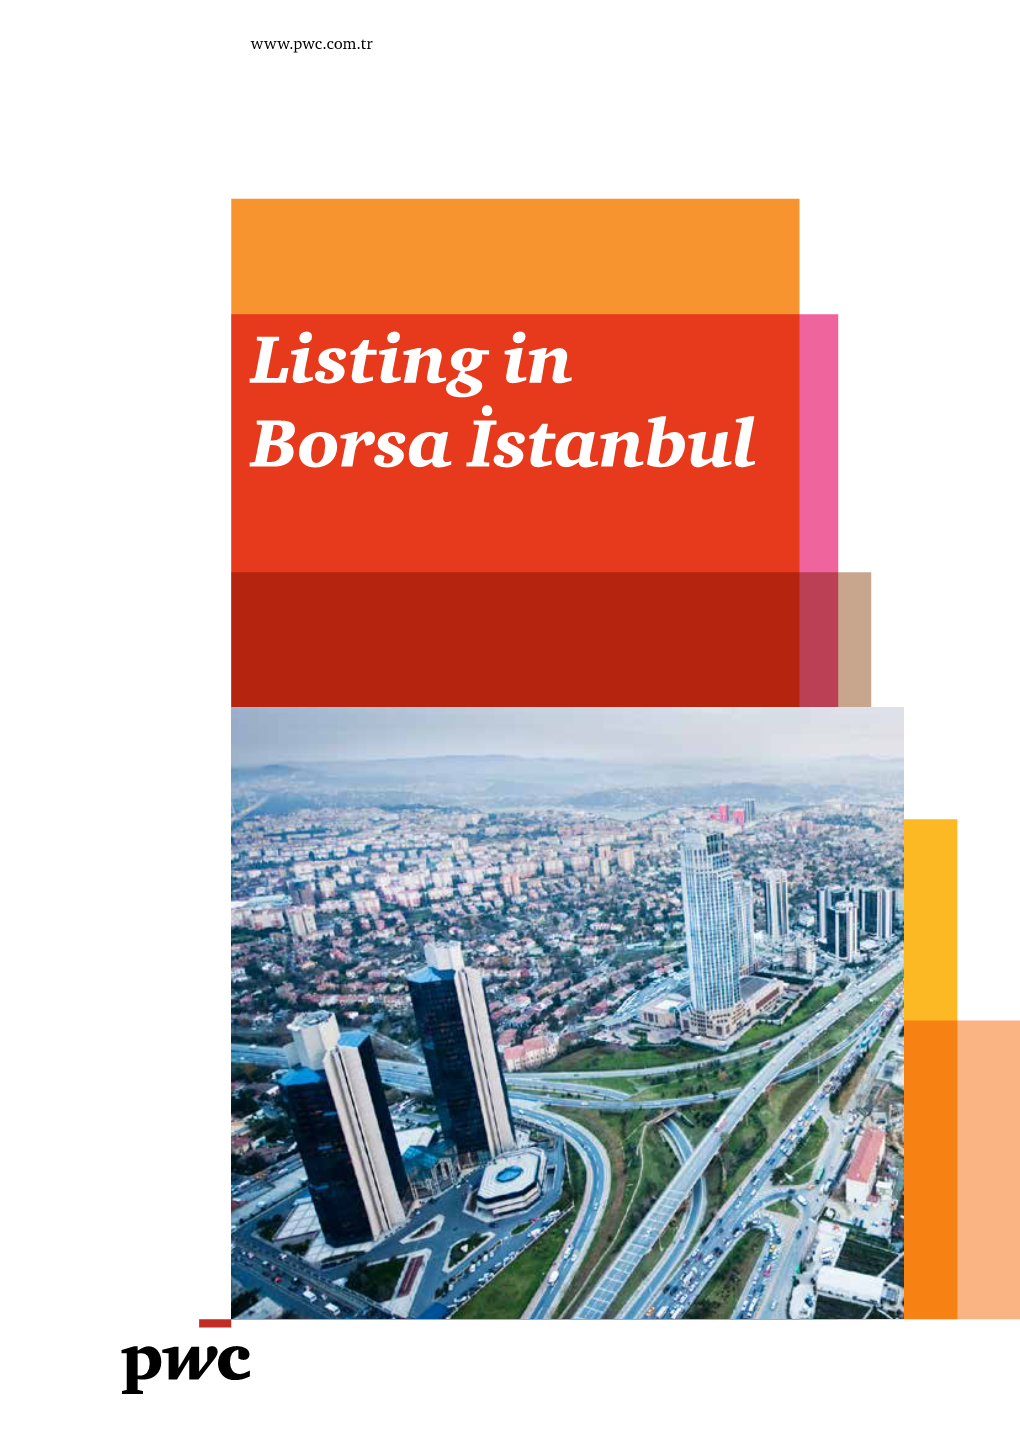 Listing in Borsa İstanbul Contents